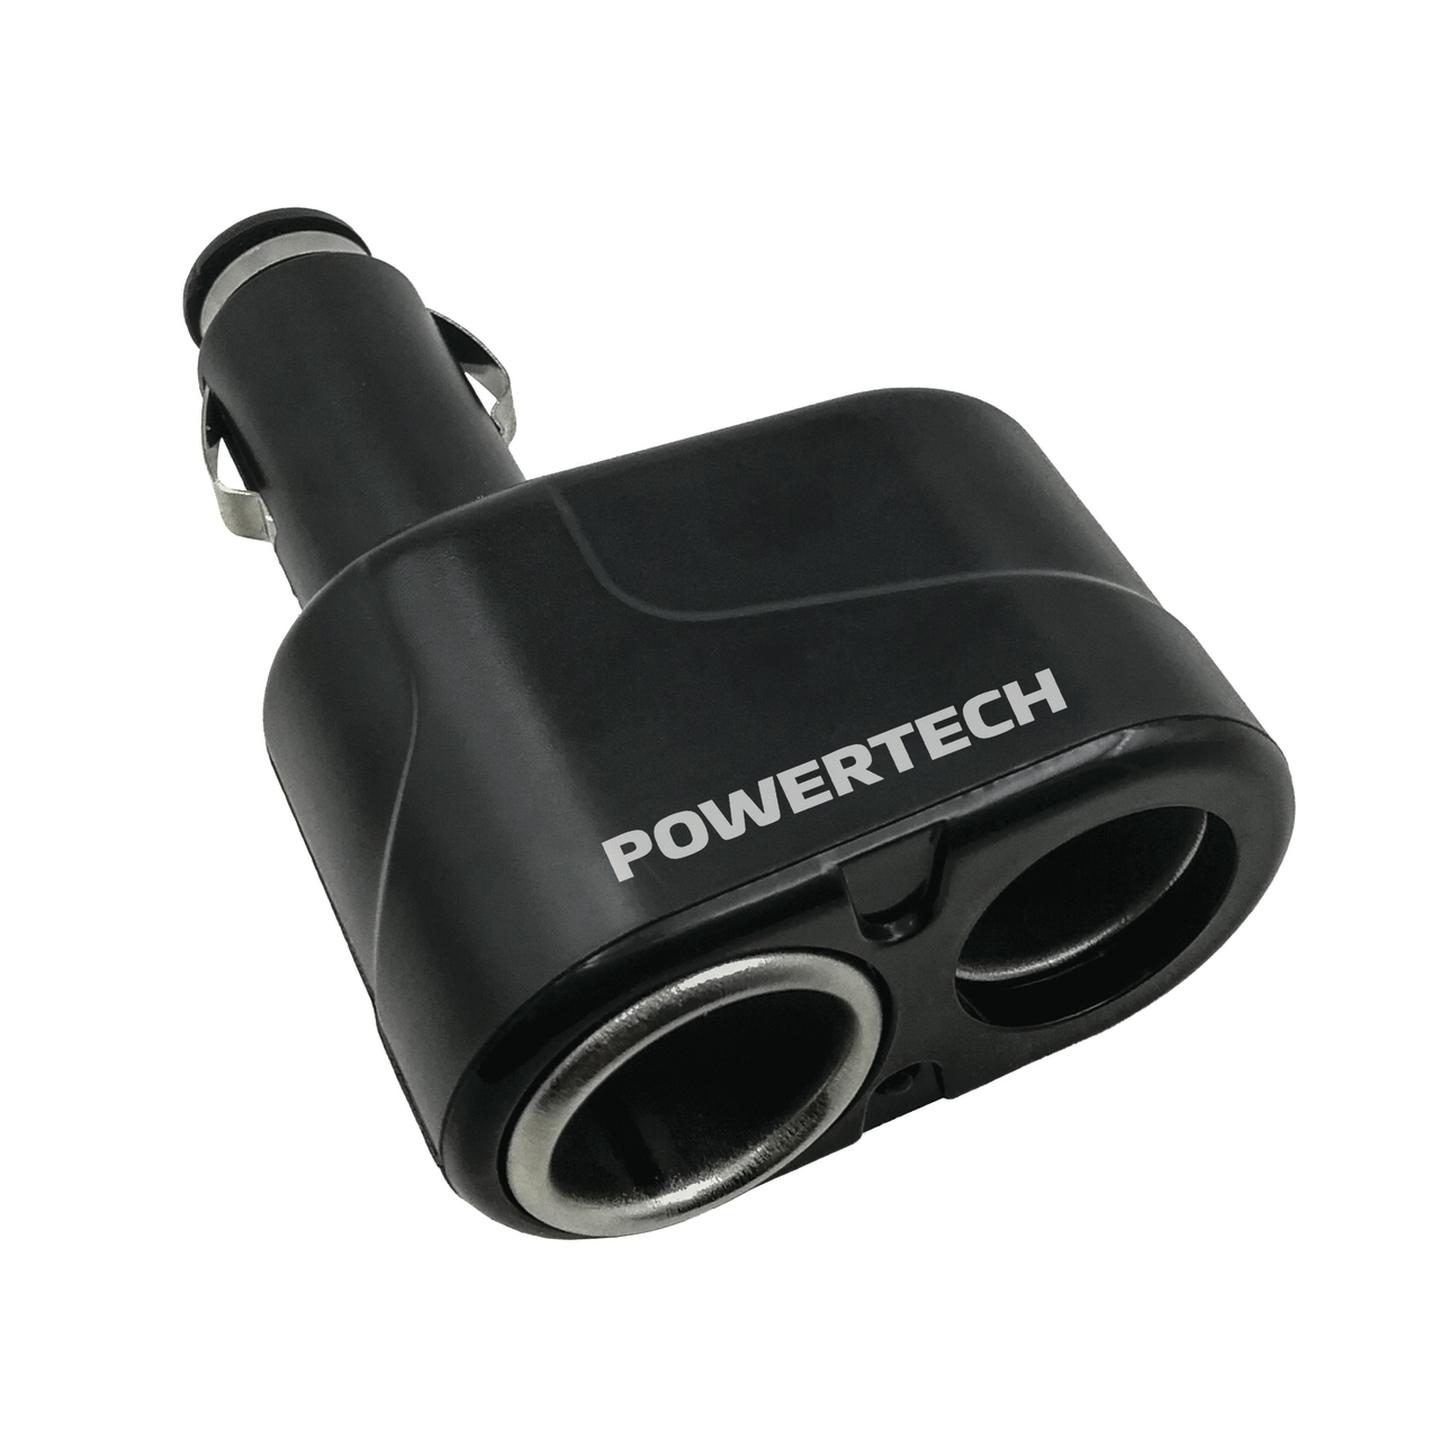 Cigarette Lighter Adaptor with Twin Socket